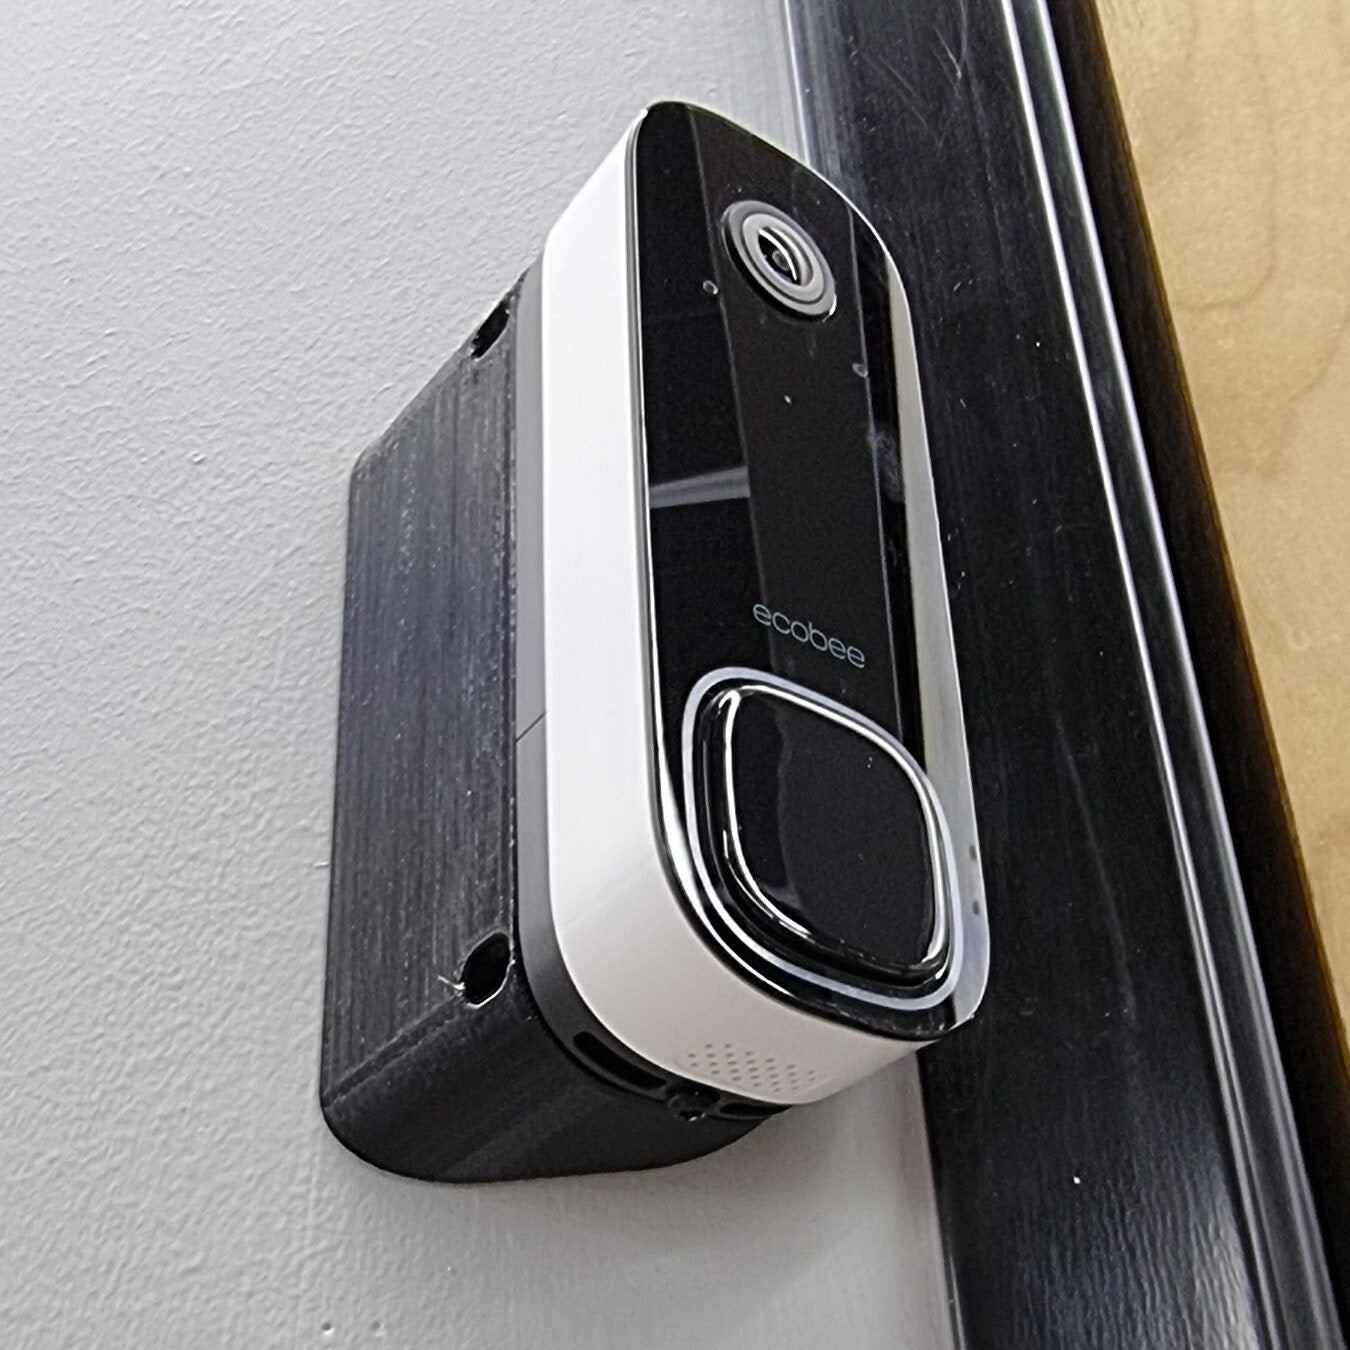 Ecobee Video Doorbell Mount, 90 Degree Angle. Get The Perfect Viewing Angle For Your Ecobee Video Doorbell